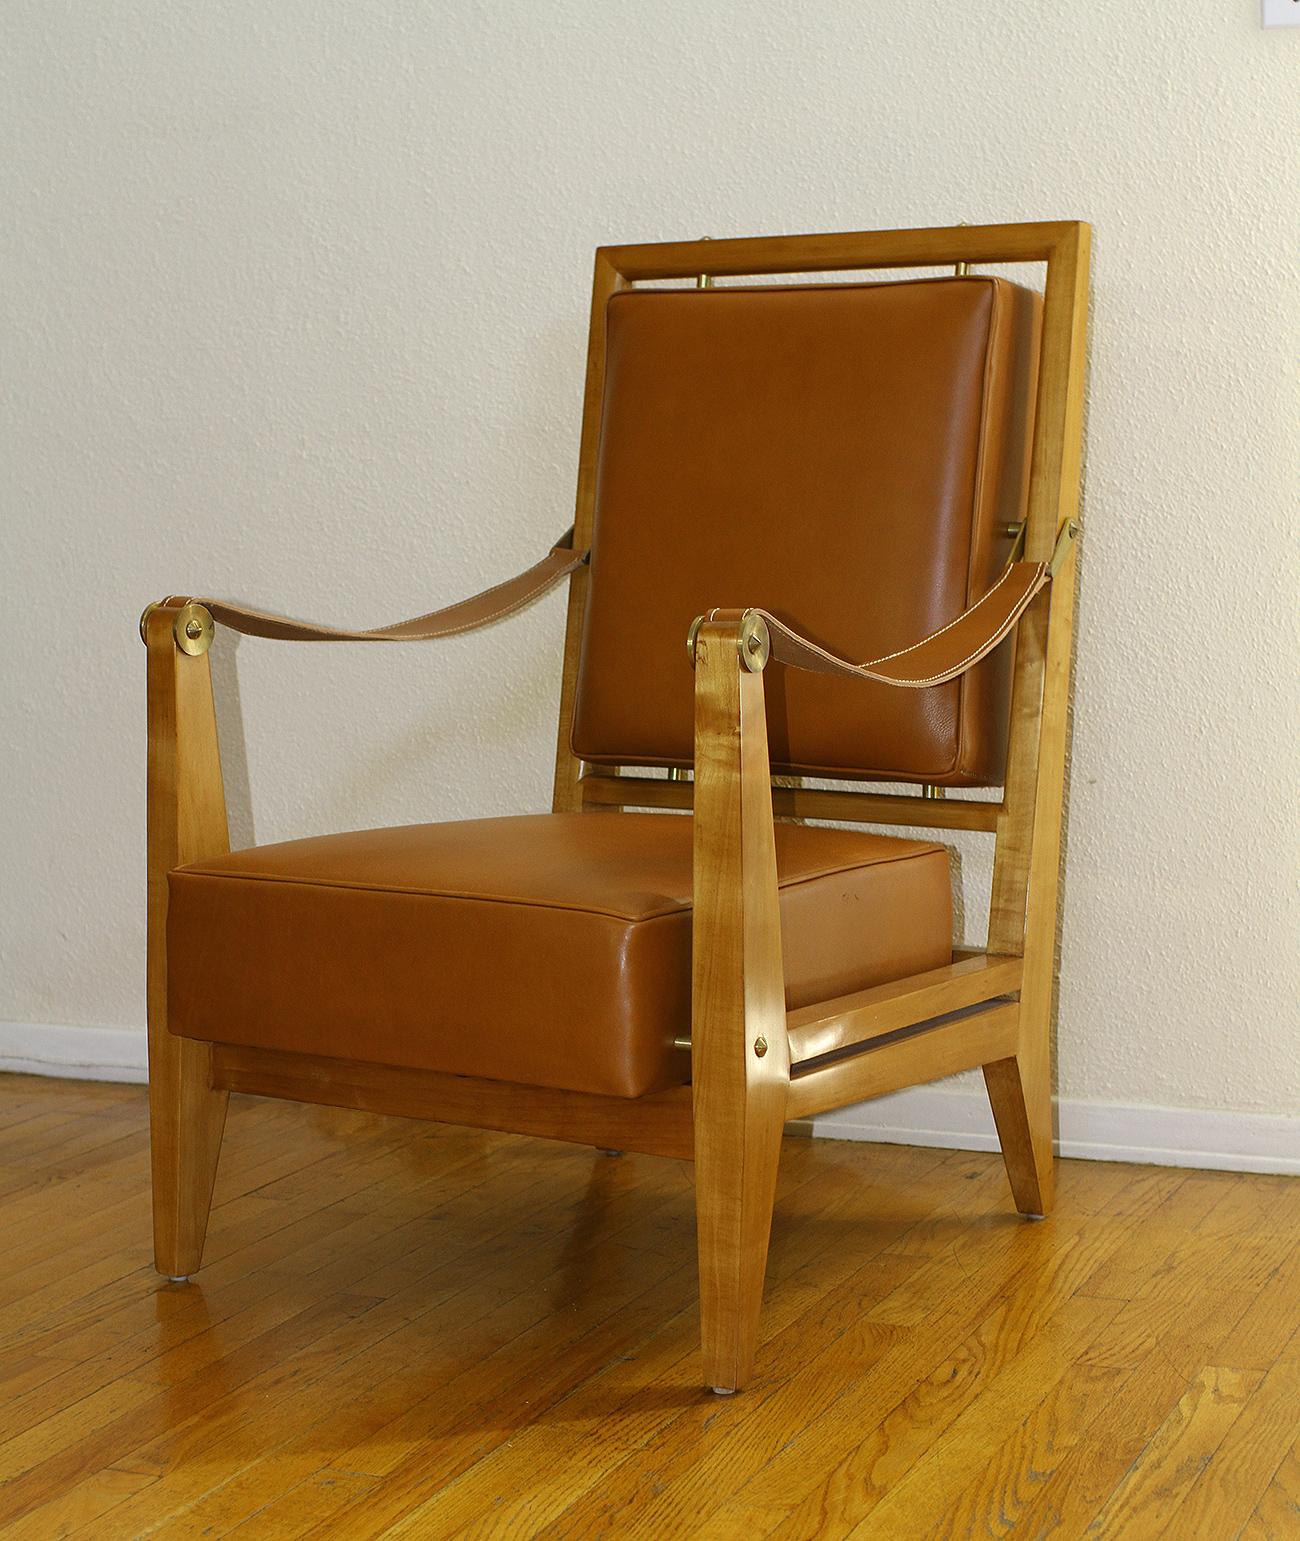 Maxime Old, Rare pair of armchairs from the Marhaba Hotel in Morocco In Excellent Condition For Sale In Encino, CA